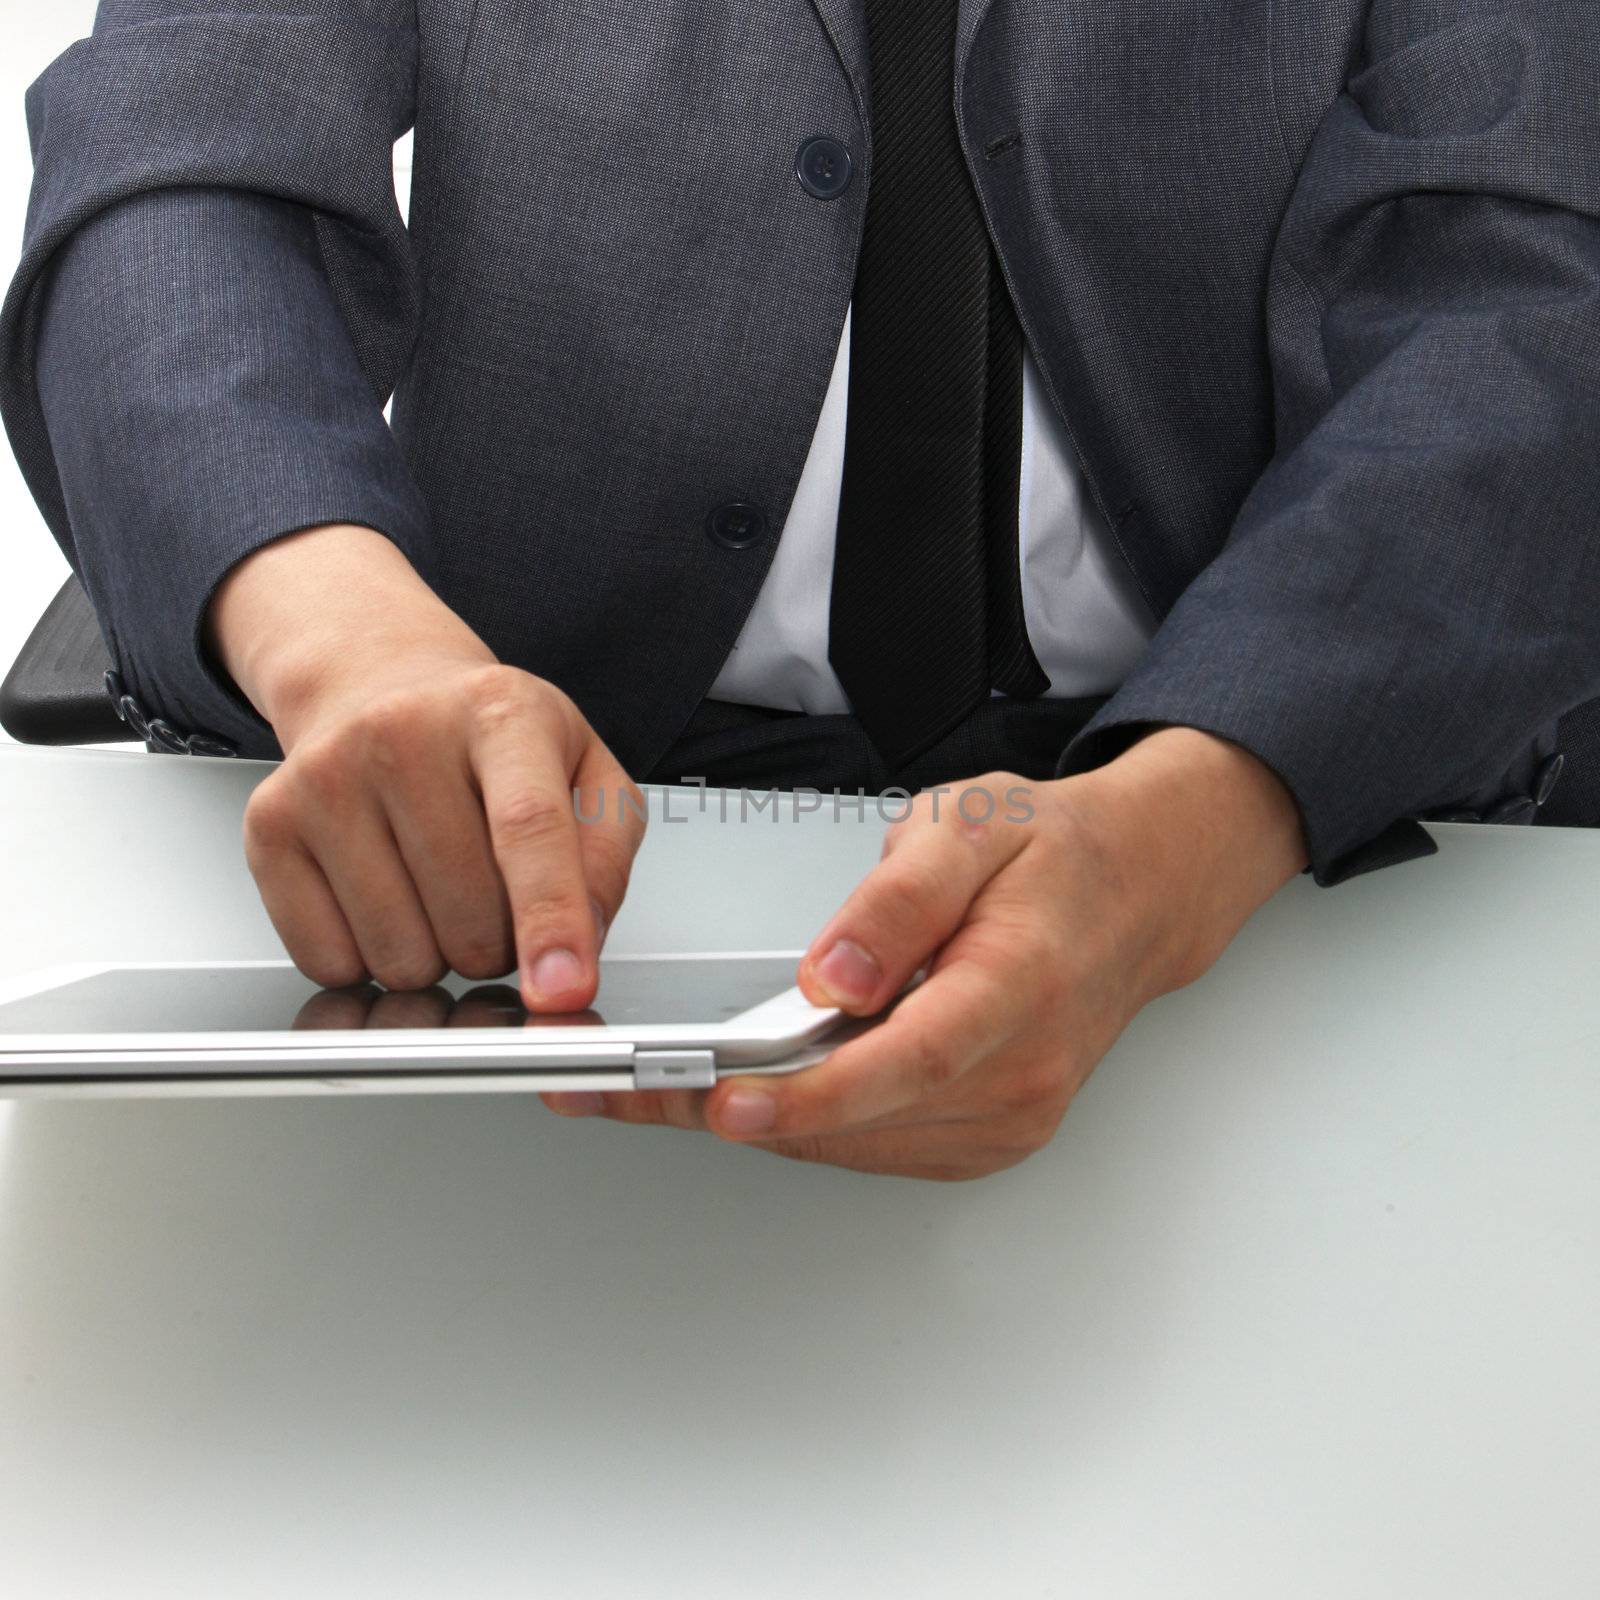 Cropped view of the torso and hands of a man seated at a desk using a tablet computer touching the screen with his finger